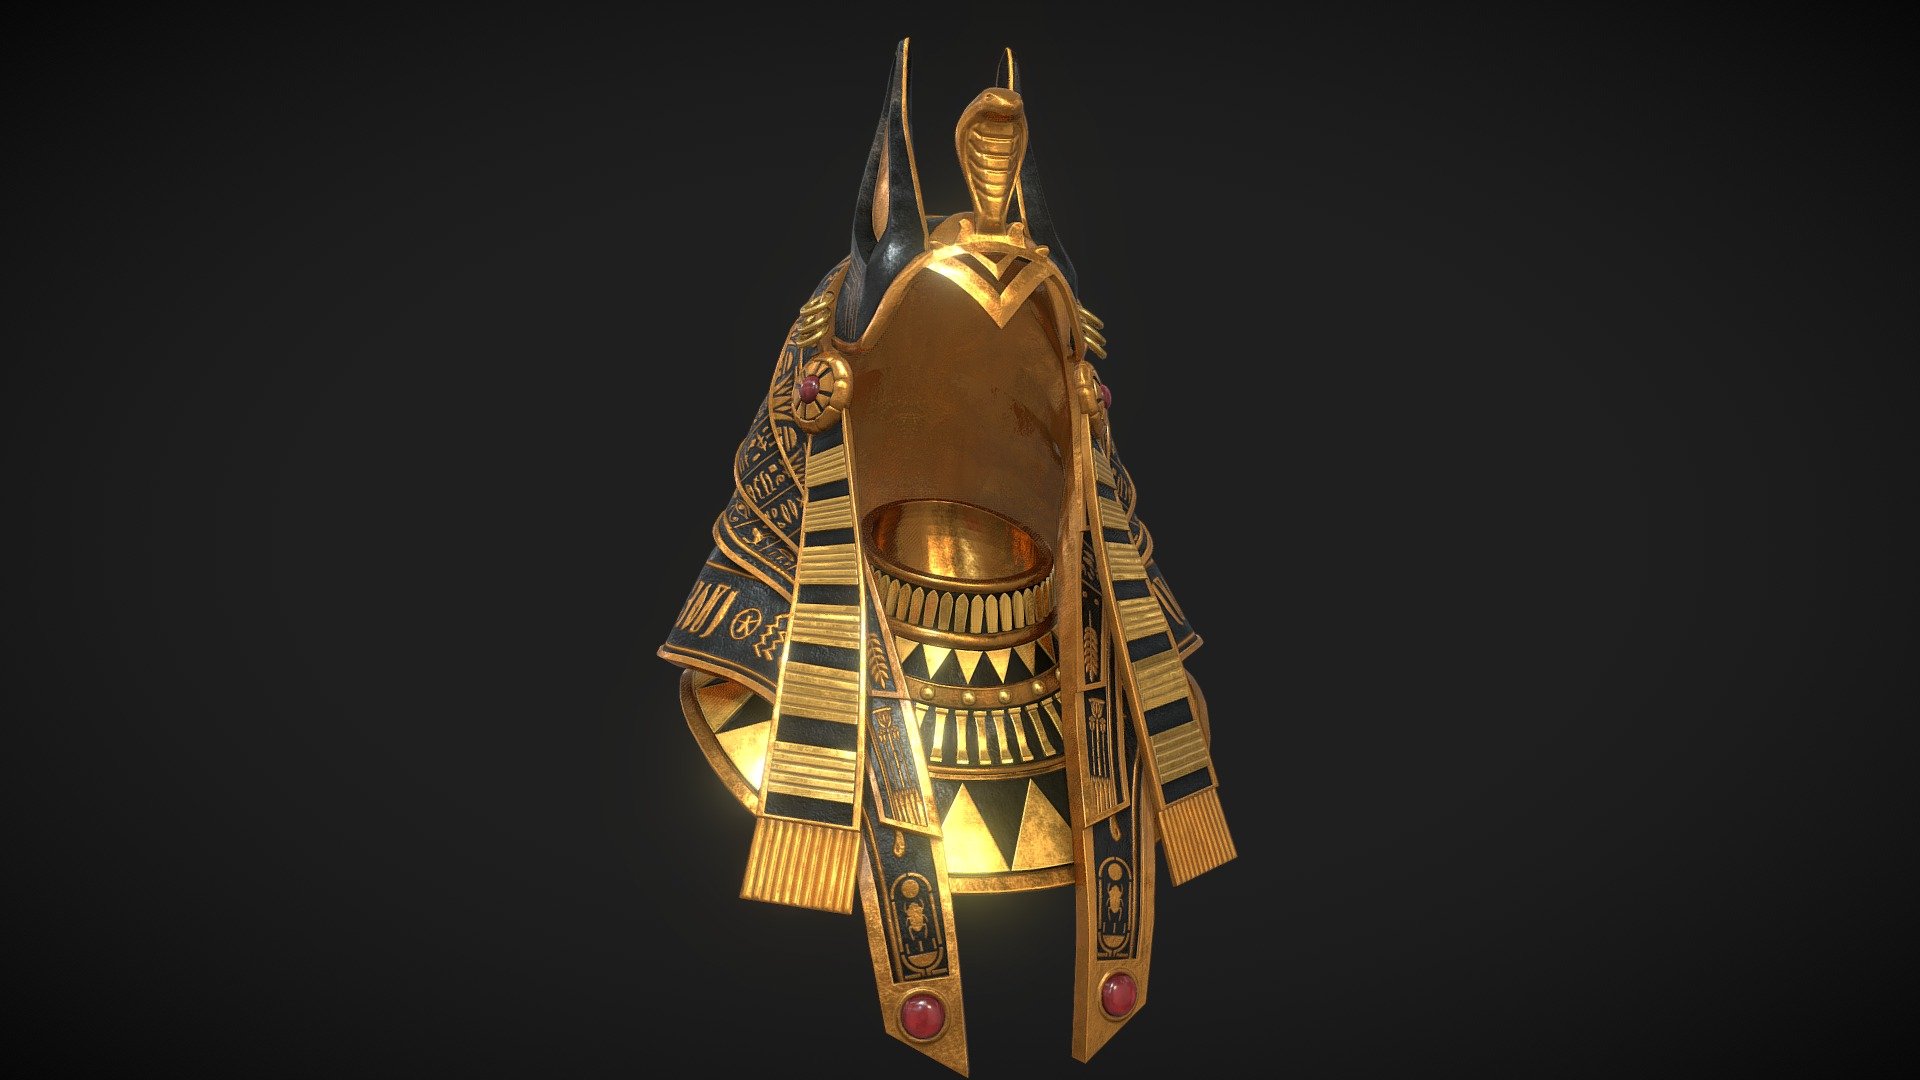 3D Model of Jewelry of the ancient Egyptian god Anubis is prepared for thematic Snapchat lens. 

Snapchat Lens link: https://lens.snapchat.com/58243039c52647f994bd5974888f338c - Egyptian Anubis Jewels - 3D model by Fonce 3d model